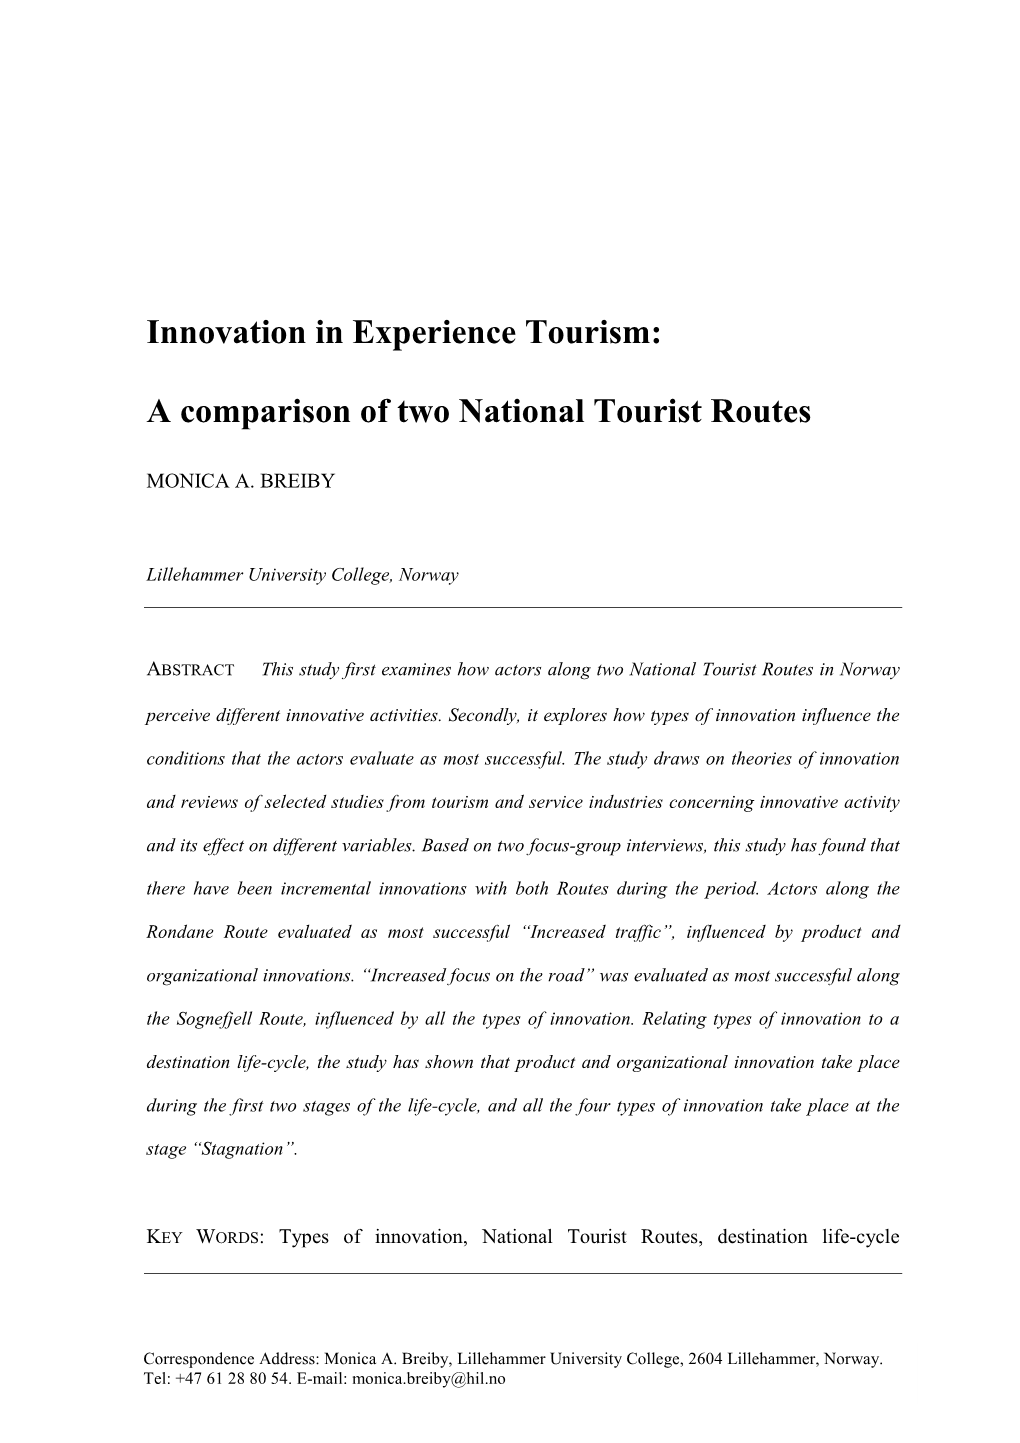 Innovation in Experience Tourism